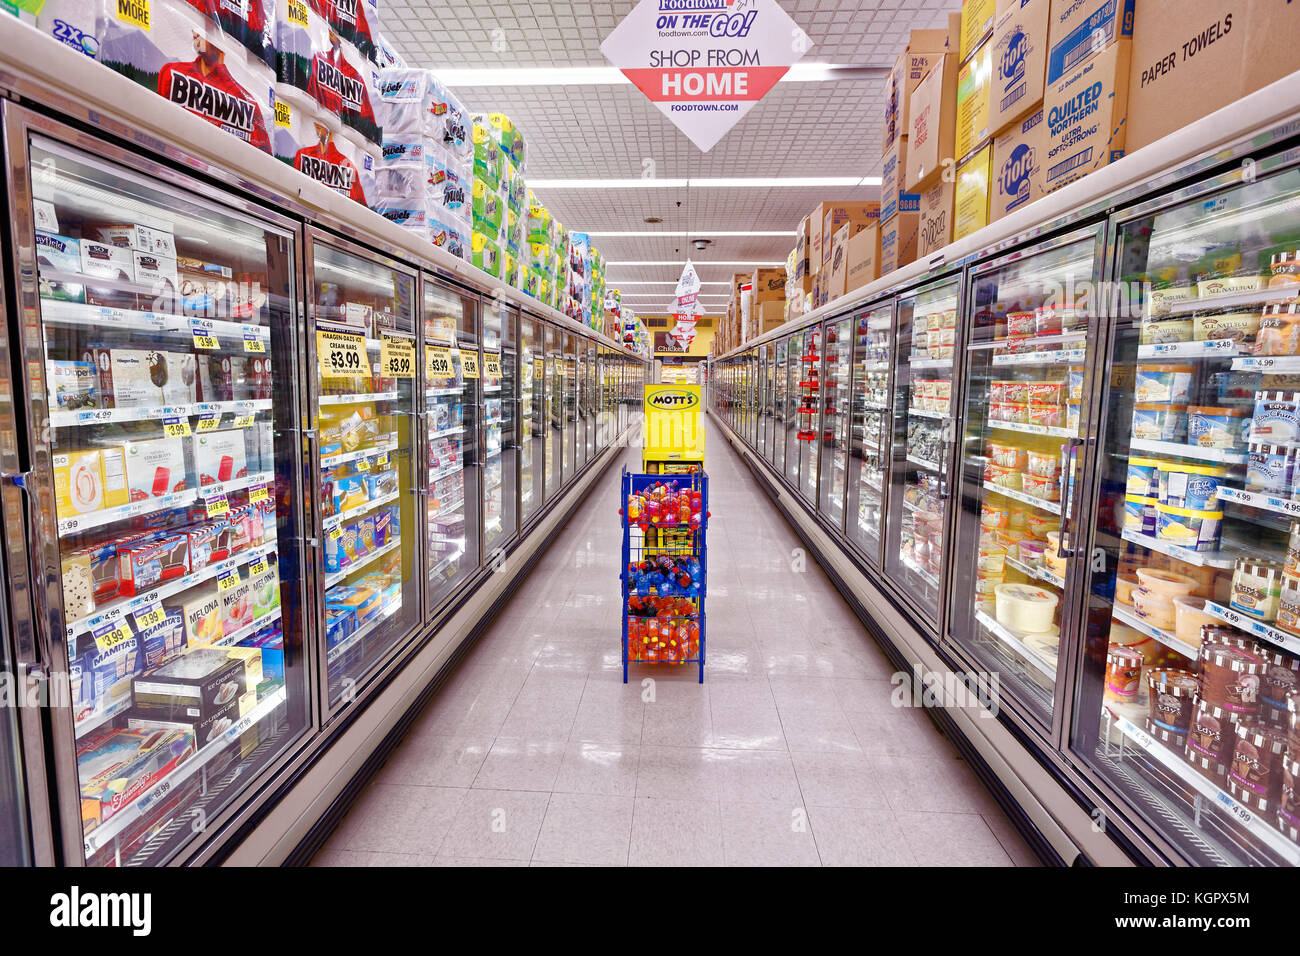 A typical food store or supermarket in the USA Stock Photo